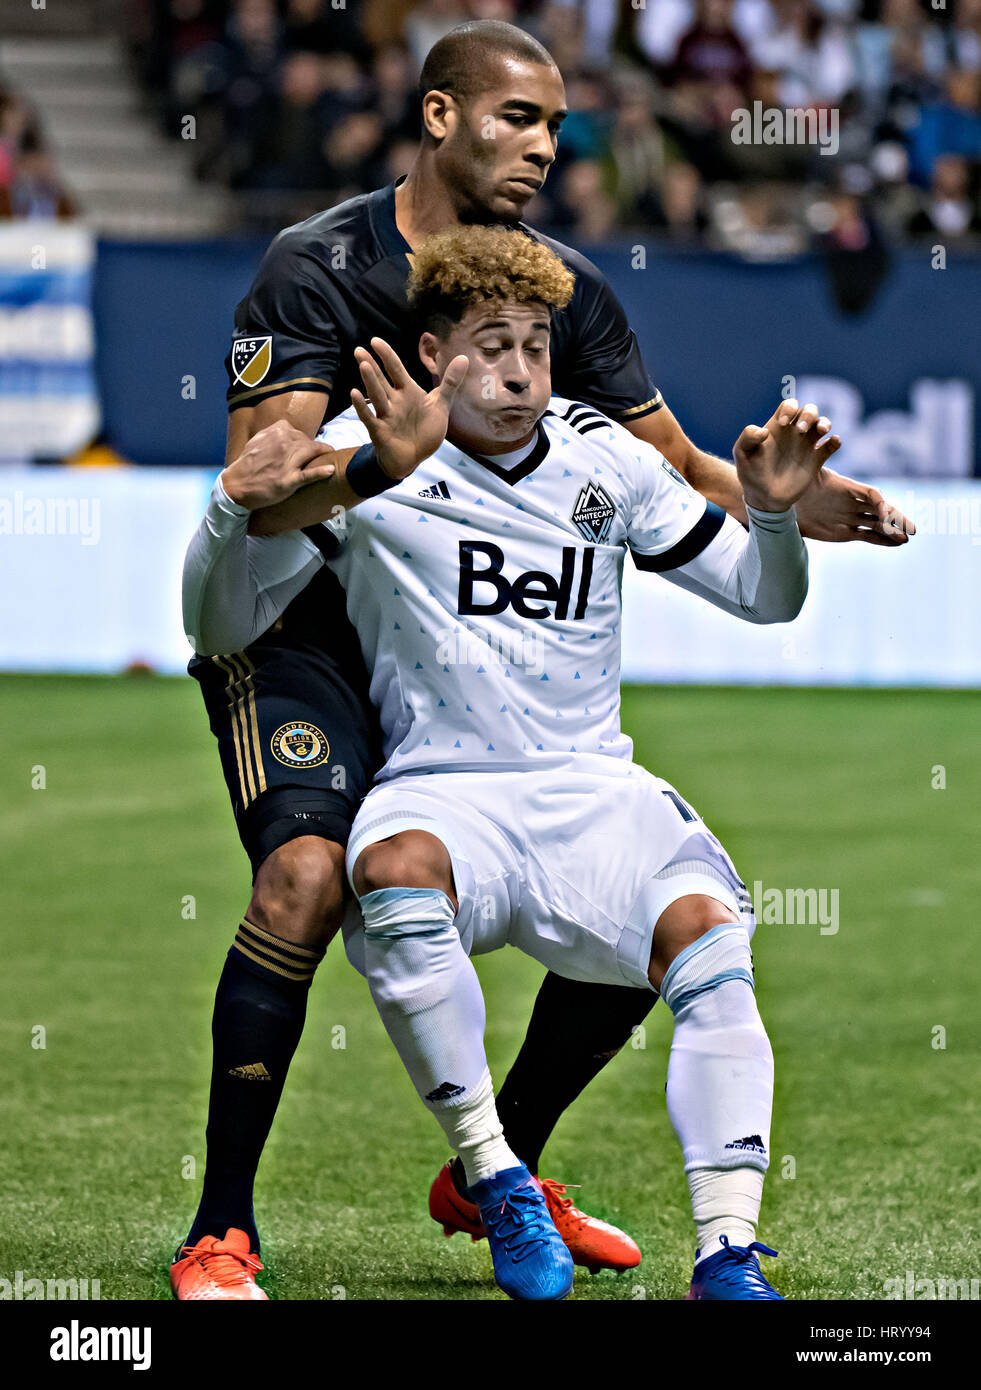 Vancouver, Vancouver. 5th Mar, 2017. Erik Hurtado(Front) of Vancouver Whitecaps vies with Oguchi Onyewu of Philadelphia Union during their Major League Soccer (MLS) match at BC Place, Vancouver, Canada on March 5, 2017. The match ended with a 0-0 draw. Credit: Andrew Soong/Xinhua/Alamy Live News Stock Photo